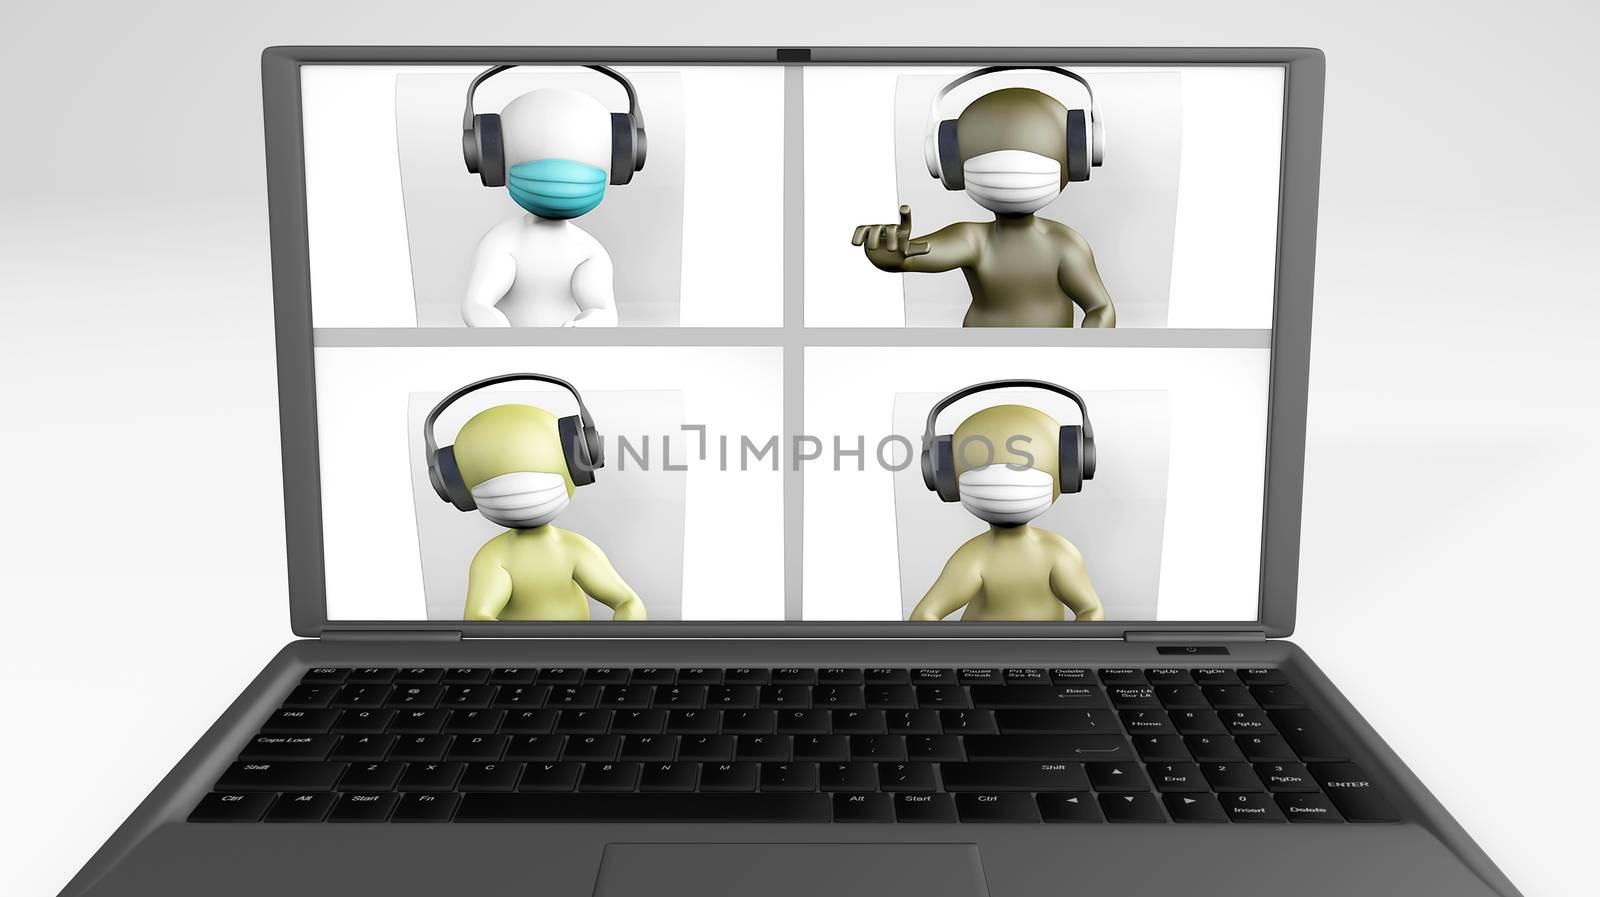 Video Call Diverse Team with Masks 3d rendering by F1b0nacci